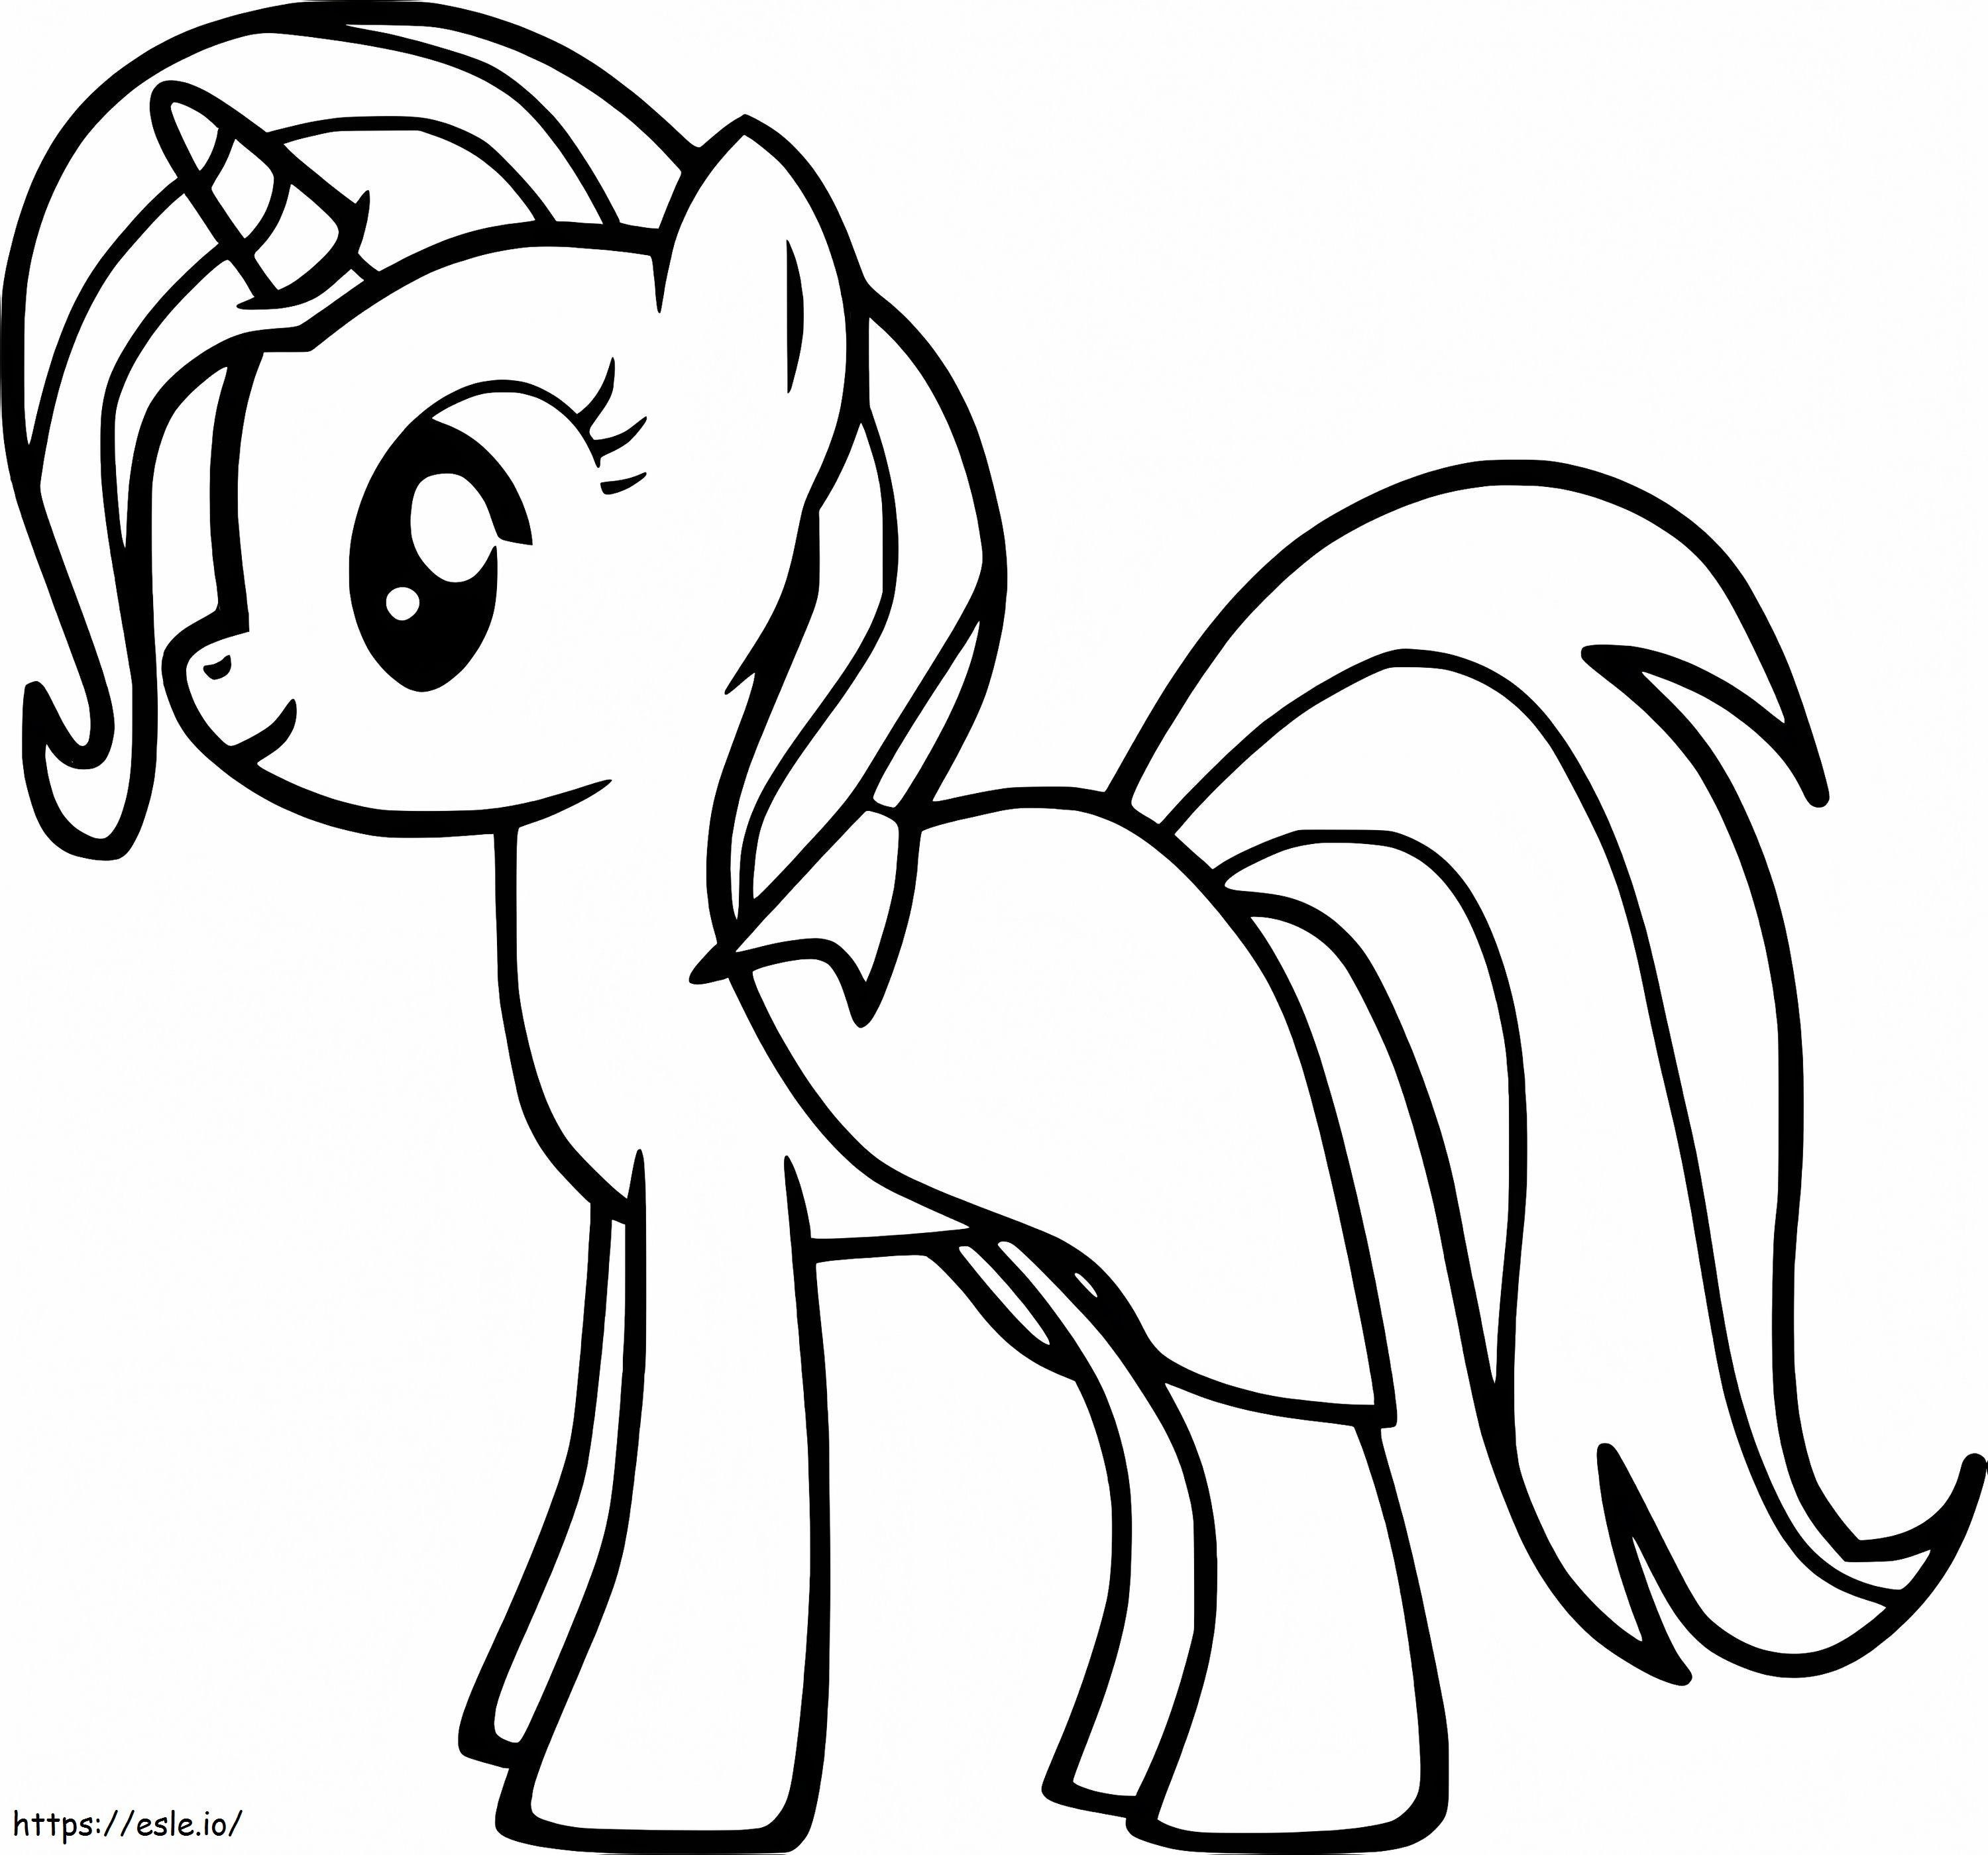 Trixie My Little Pony coloring page